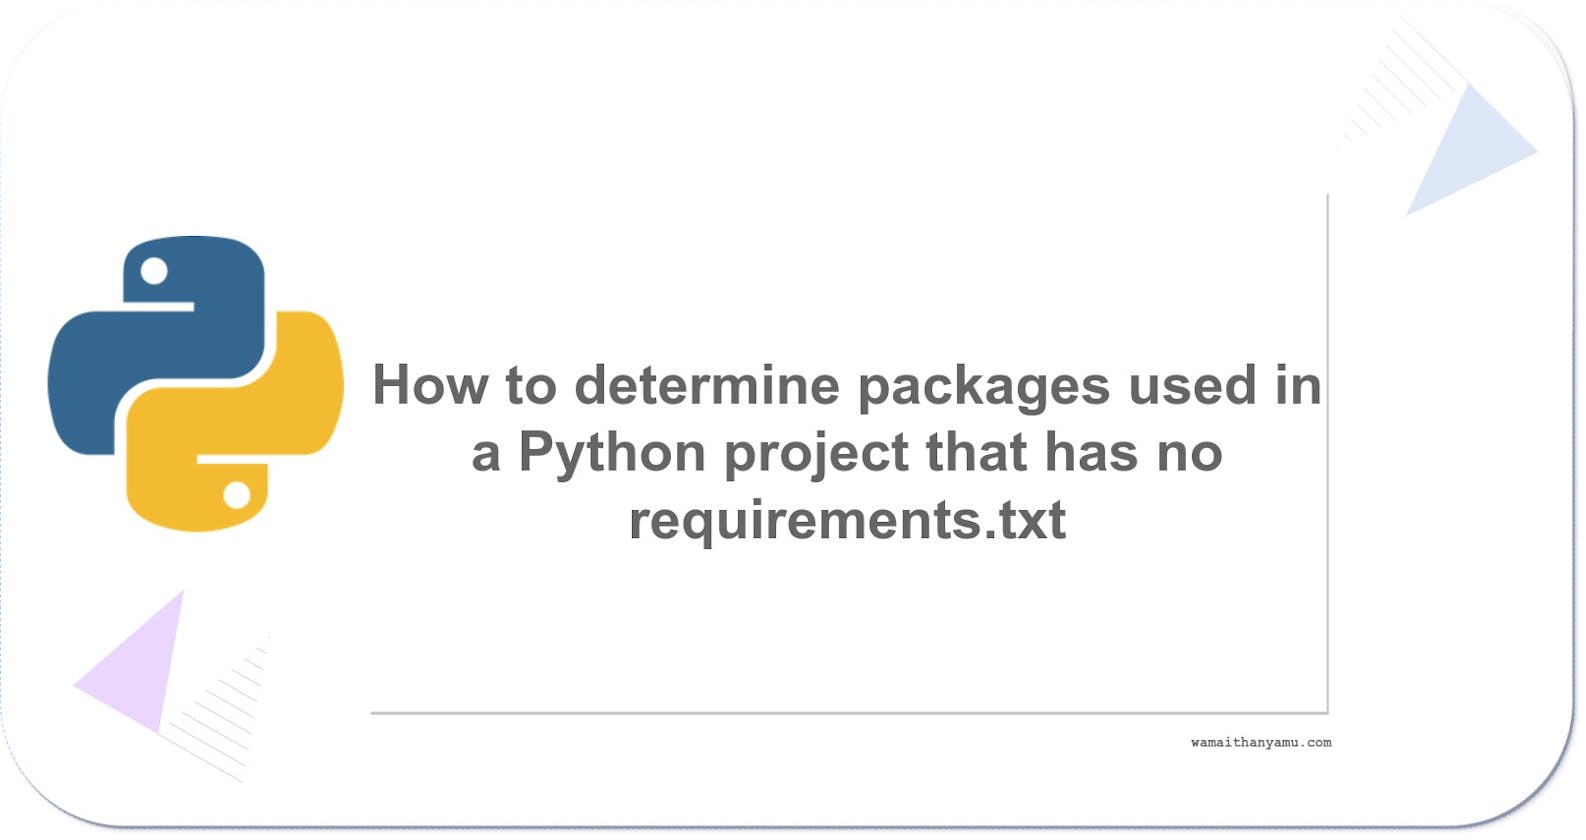 How to determine packages used in a Python project that has no requirements.txt